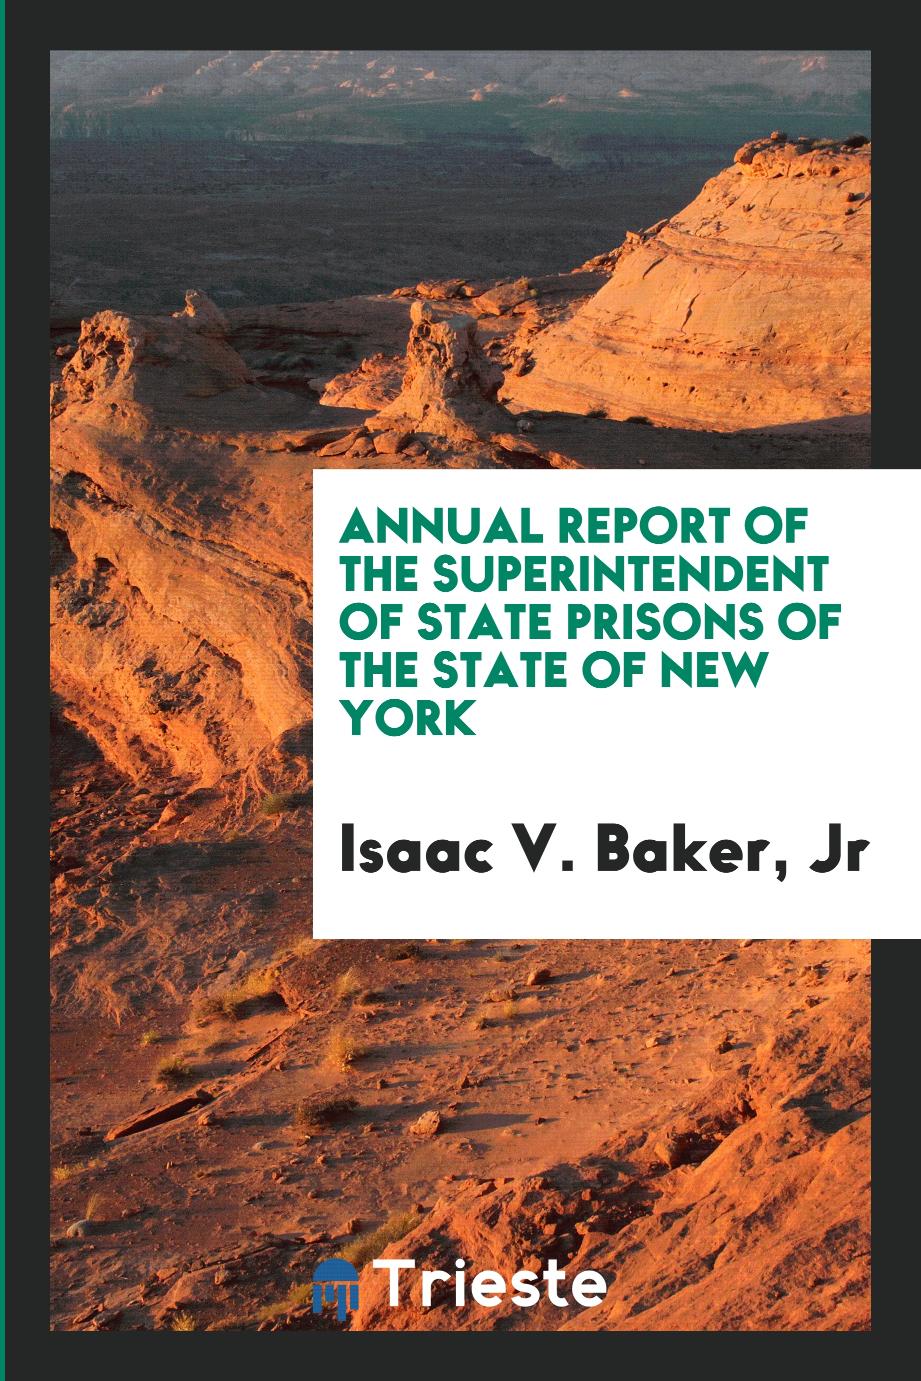 Annual report of the Superintendent of State Prisons of the State of New York